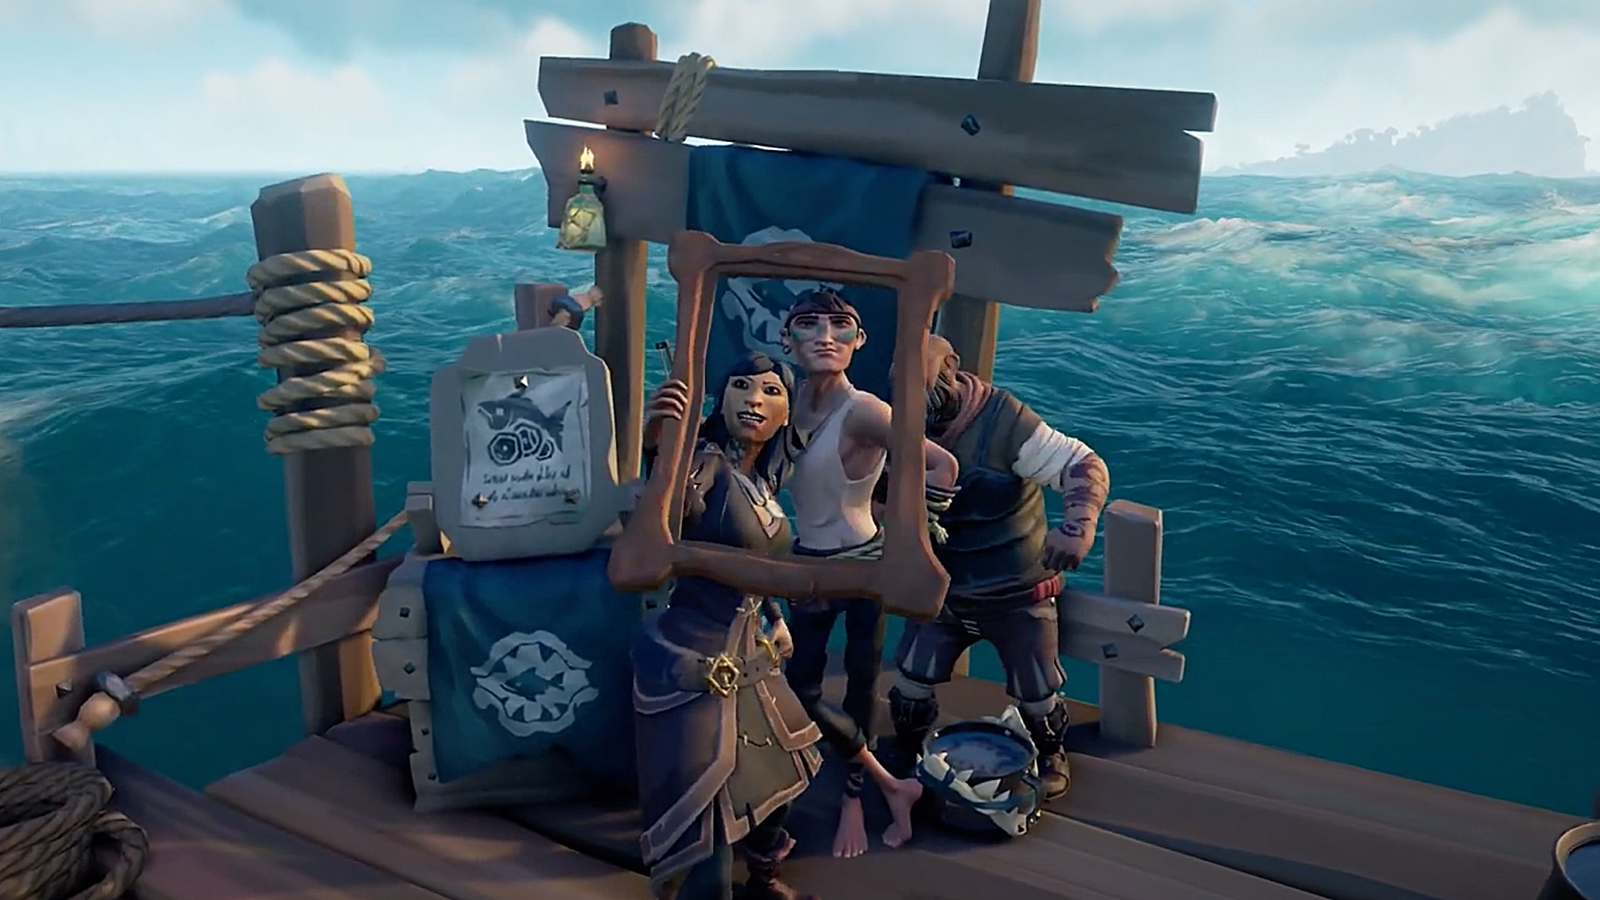 The Glory of the Sea of Thieves